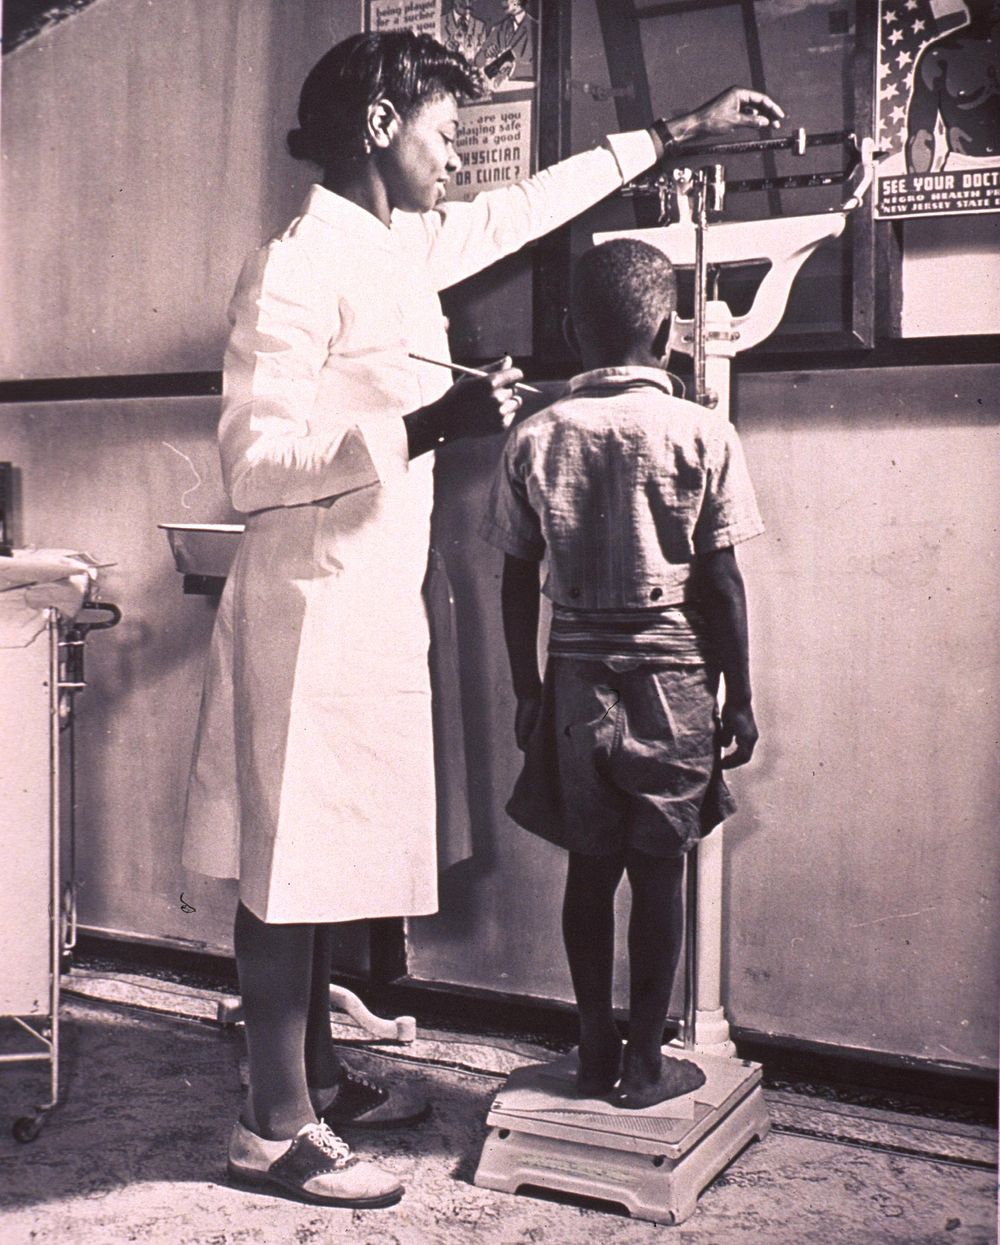 Nurse weighing childContributor(s): United States. Federal Security Agency. Original public domain image from Flickr